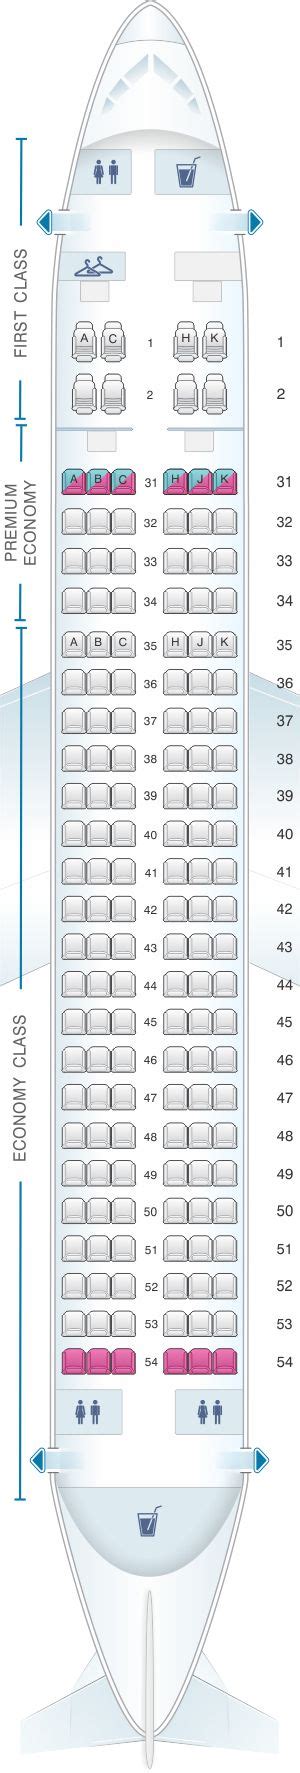 Seat Map China Southern Airlines Airbus A320